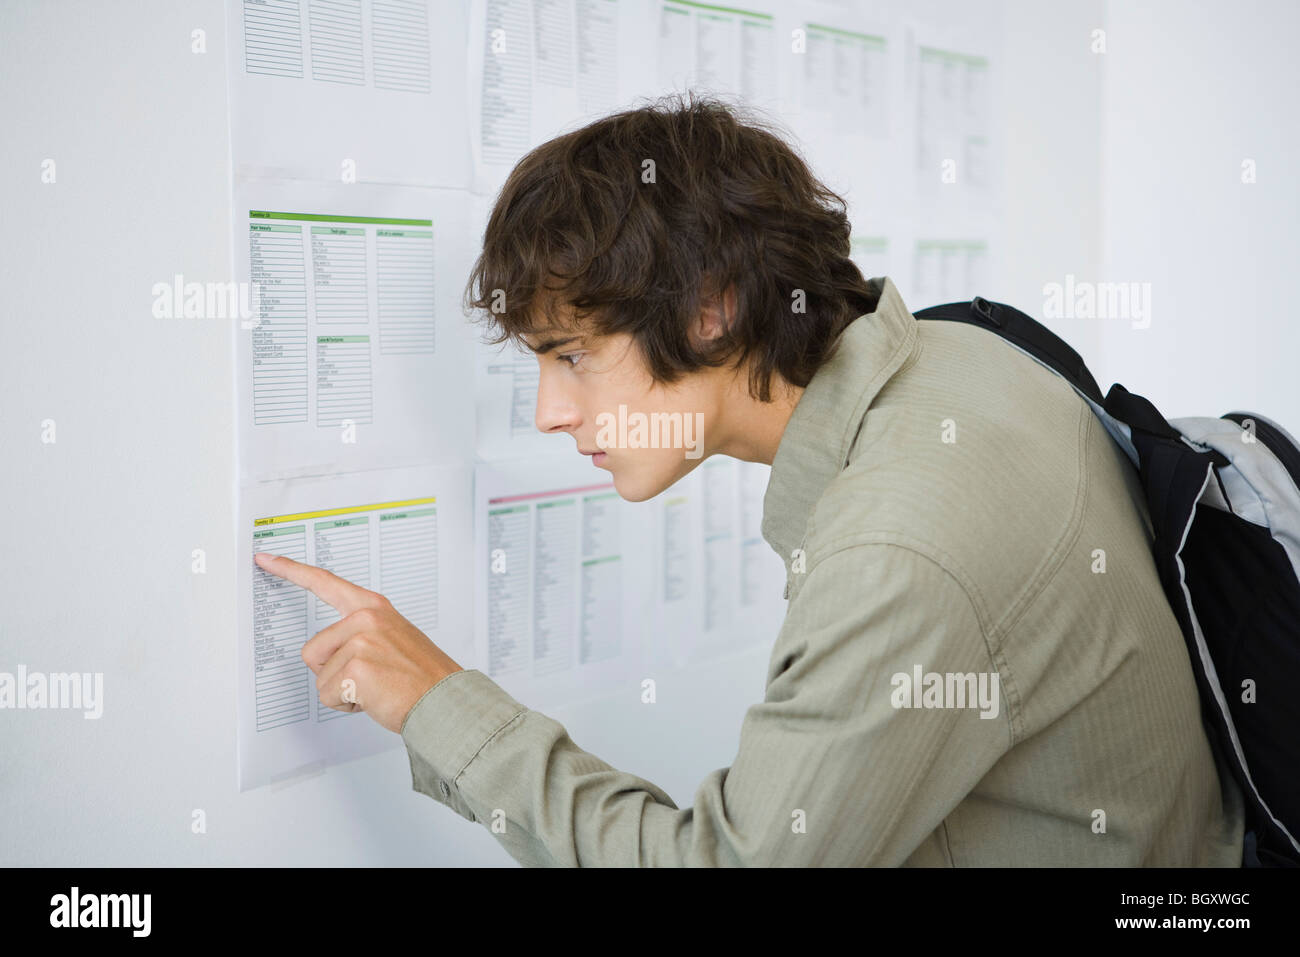 Male college student checking results posted on bulletin board Stock Photo